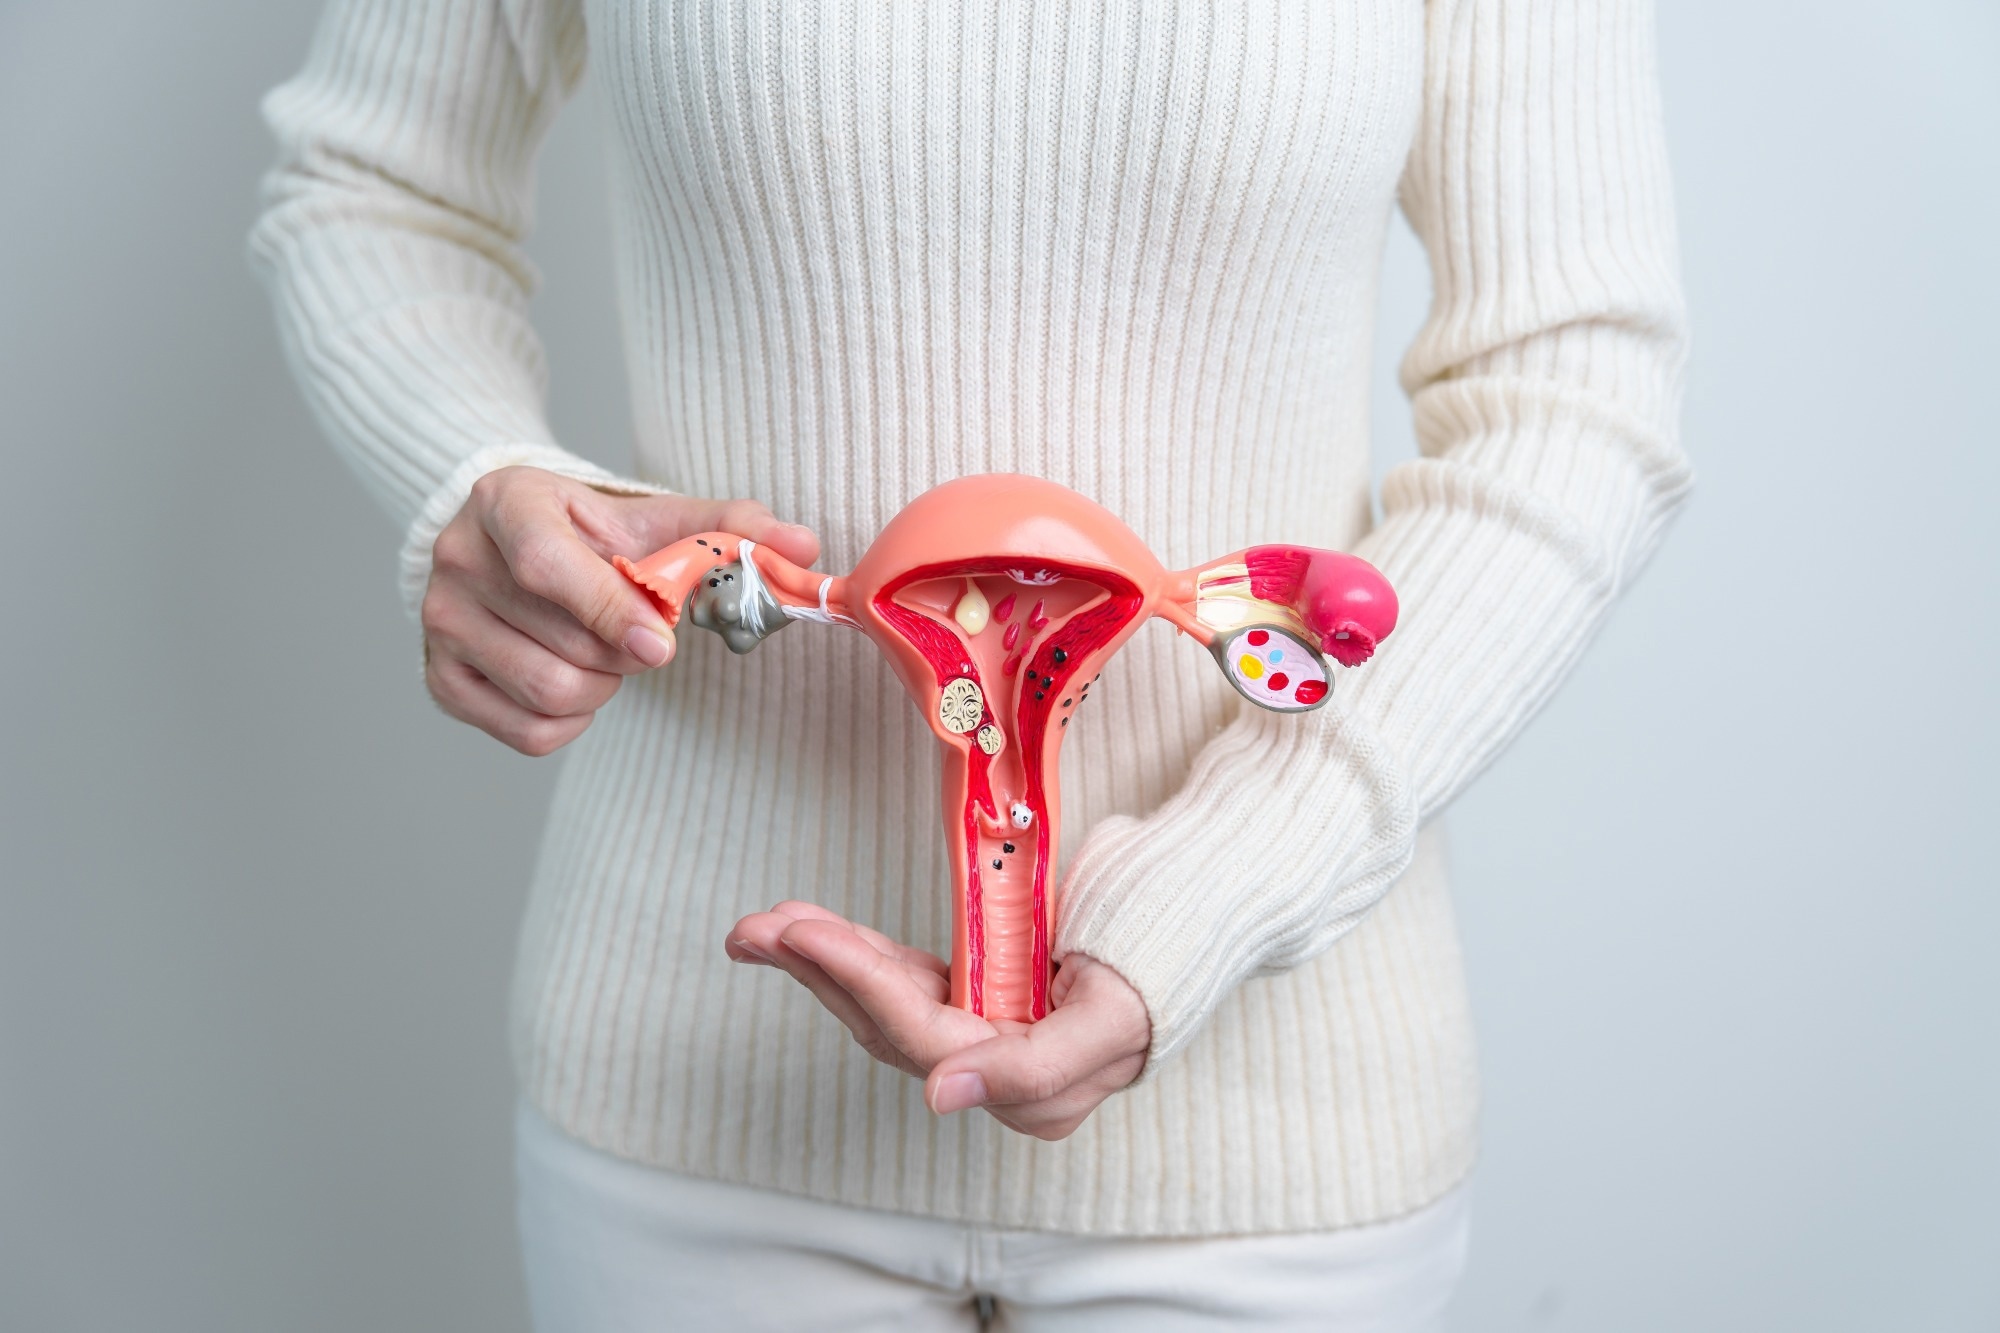 Study: How Can Selected Dietary Ingredients Influence the Development and Progression of Endometriosis? Image Credit: Jo Panuwat D/Shutterstock.com